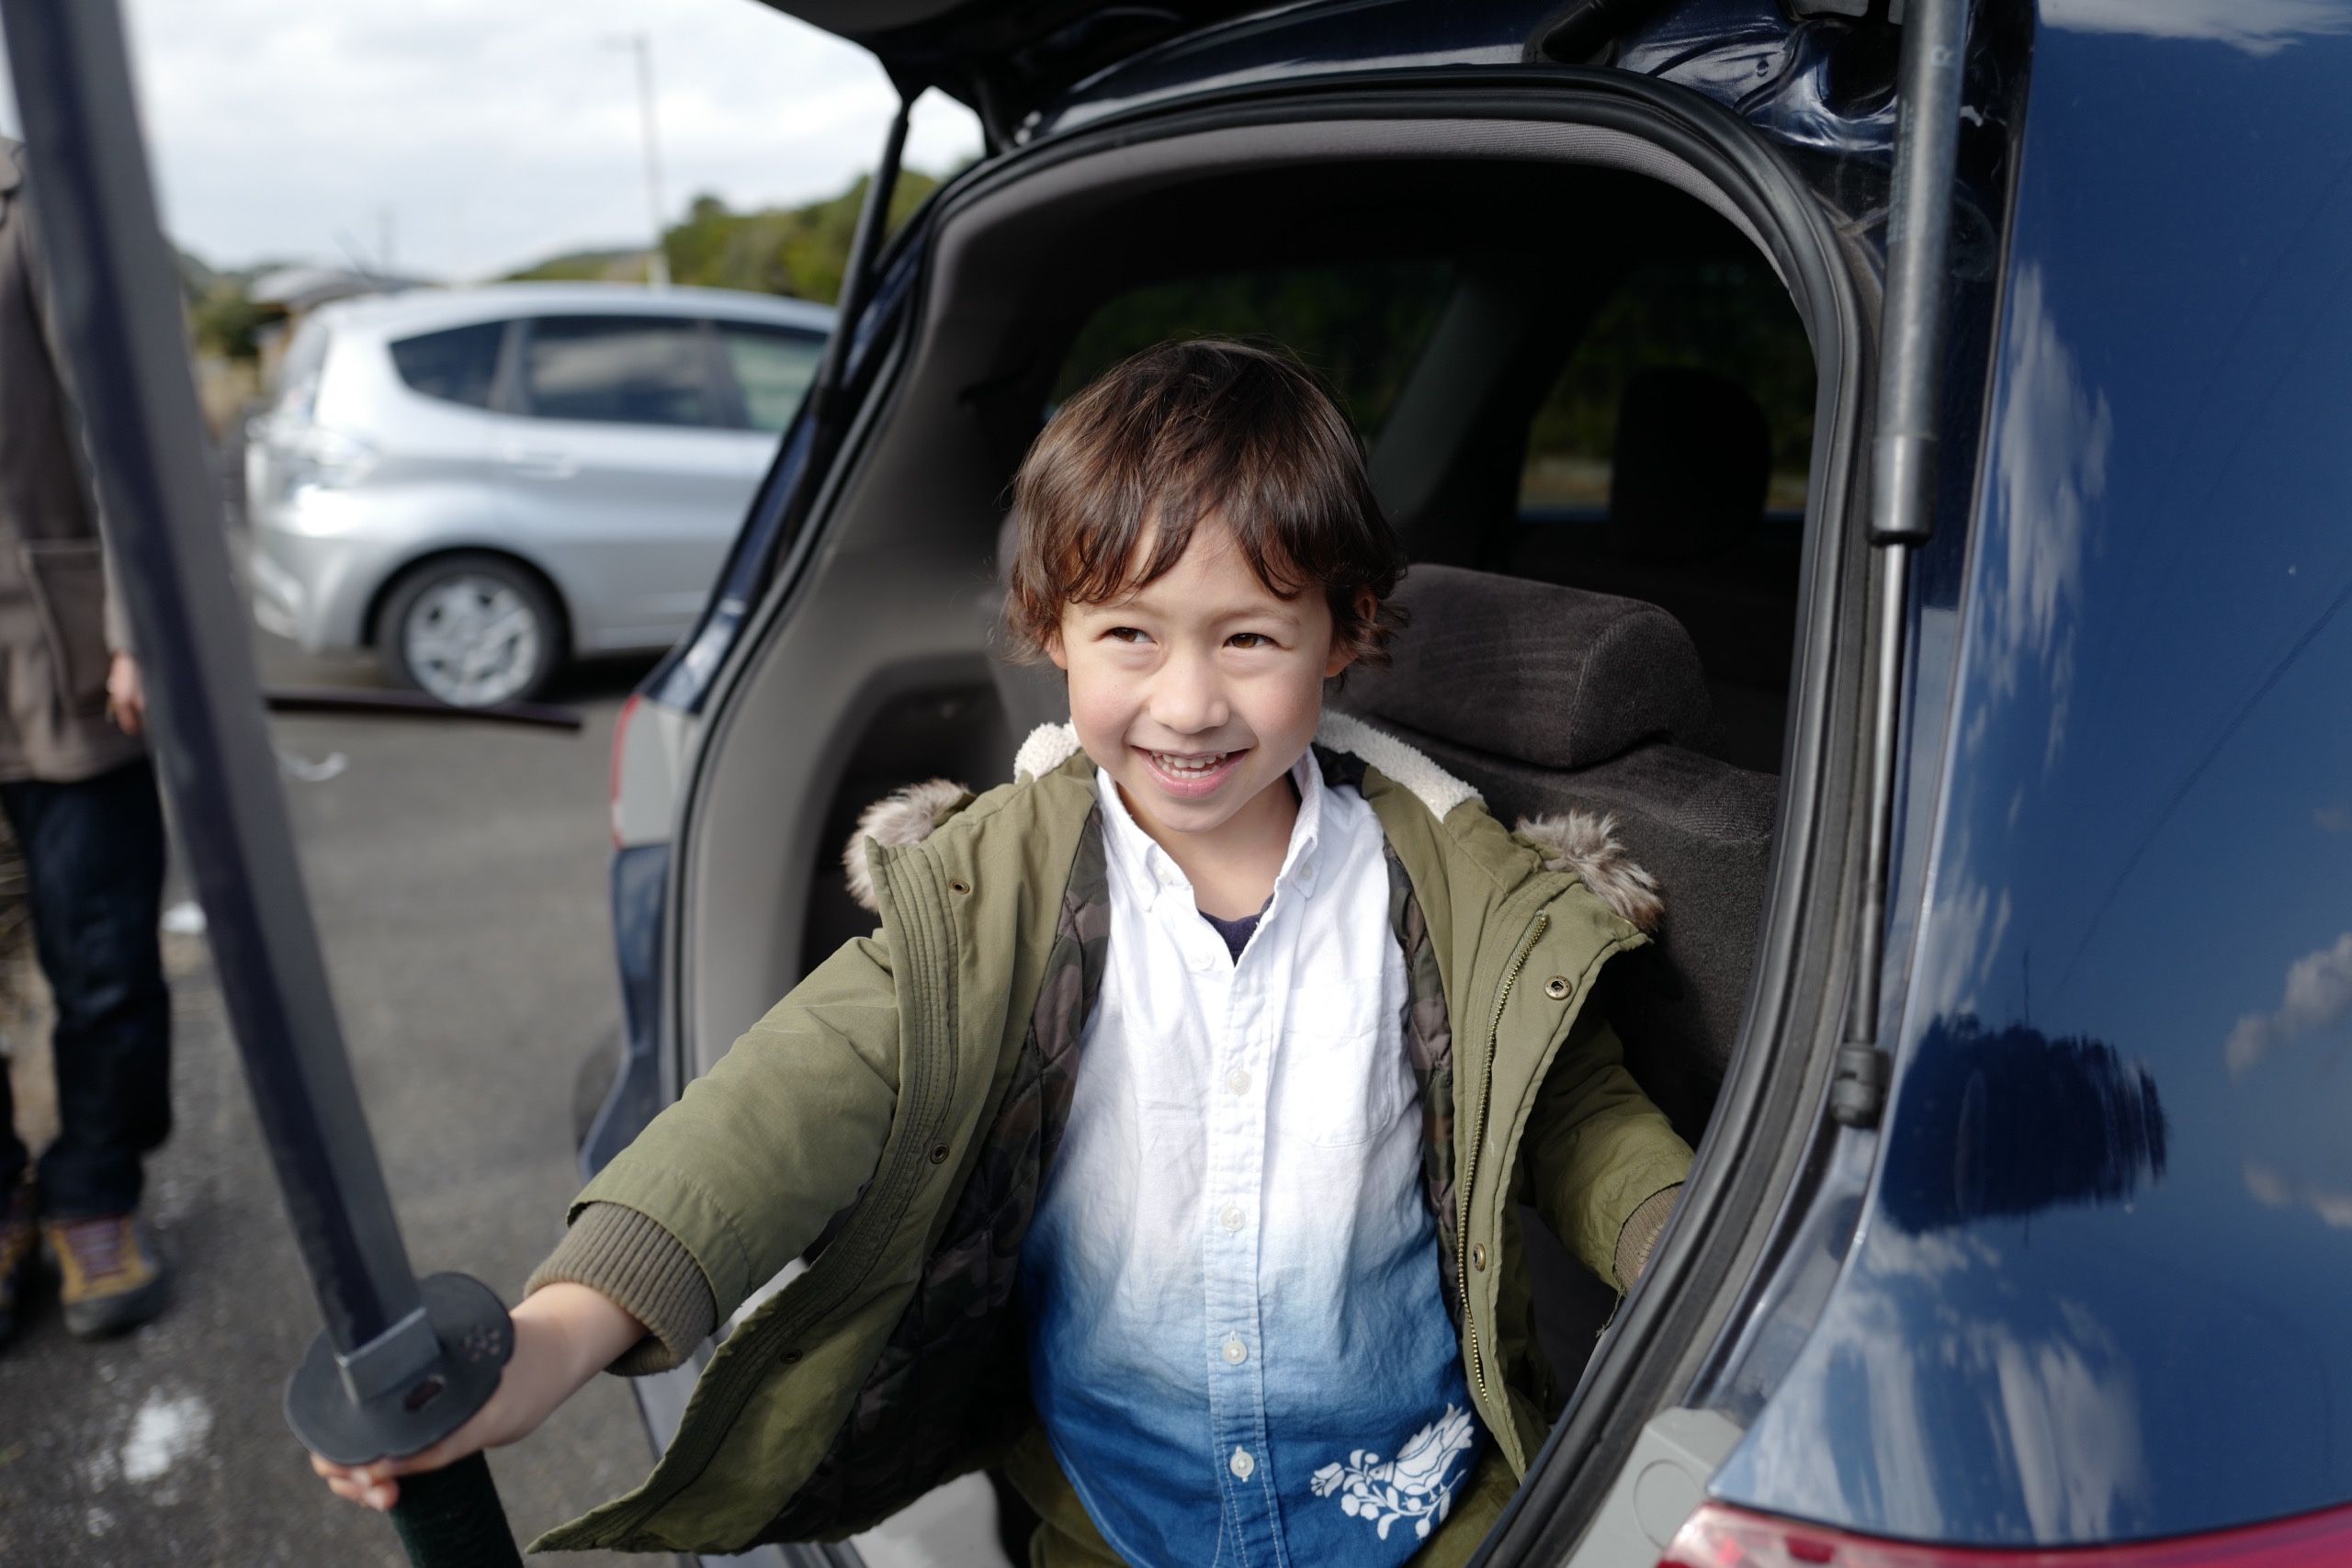 A young boy in a green parka and a hand-dyed indigo shirt, Hanga’s son Mihály, brandises a samurai sword as he stands in the trunk of a car.